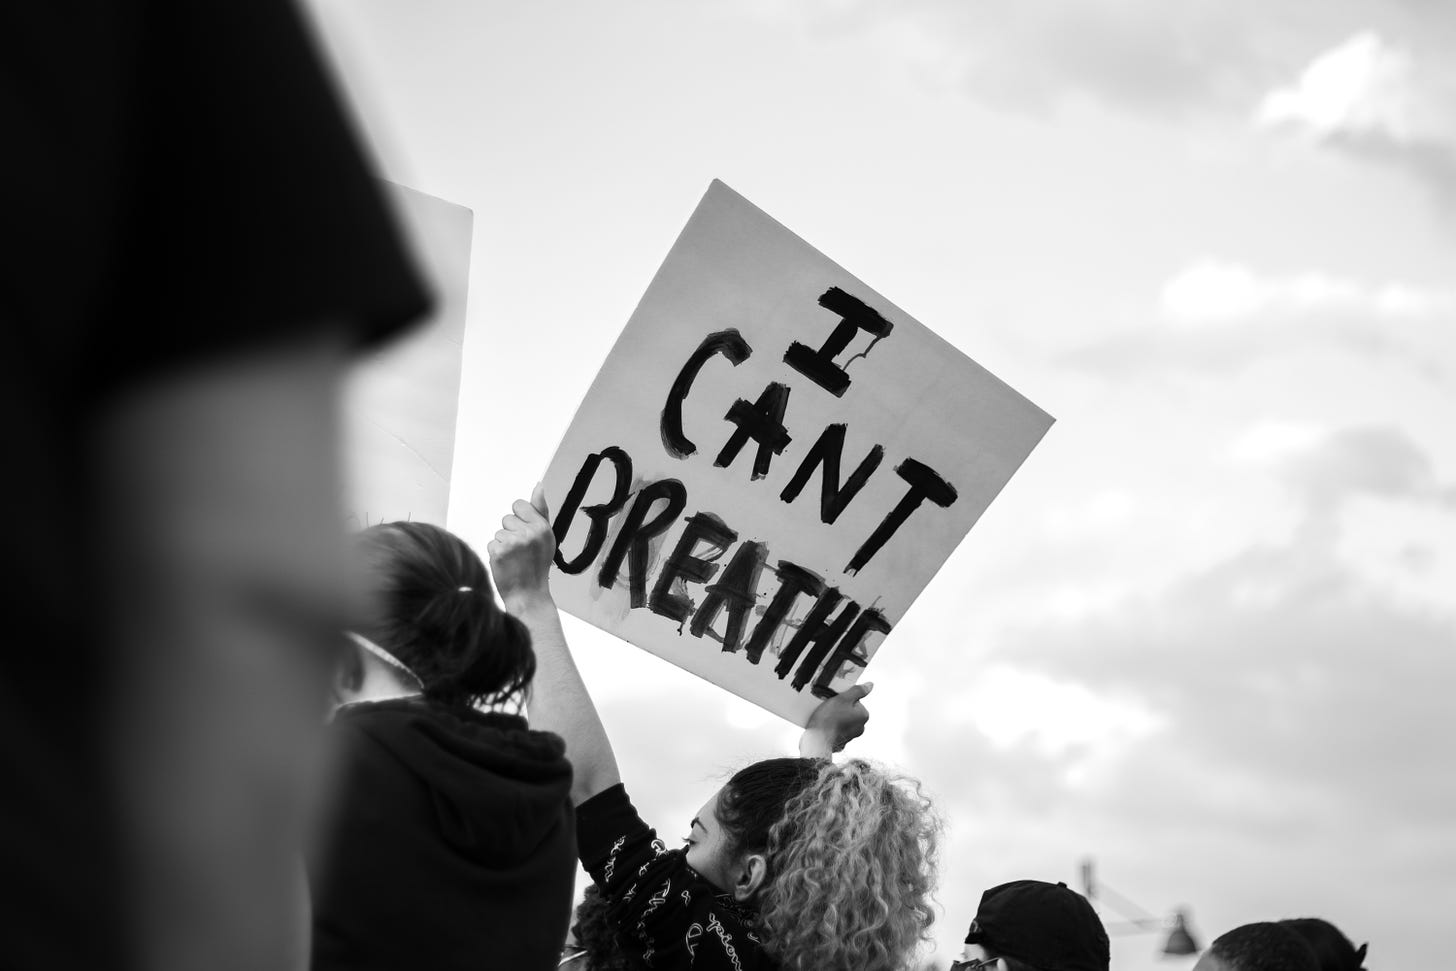 A black-and-white photo of a young woman holding up a protest sign against a cloudy sky, surrounded by a crown of people. The sign, written with black marker on white cardboard, reads "I CAN'T BREATHE"